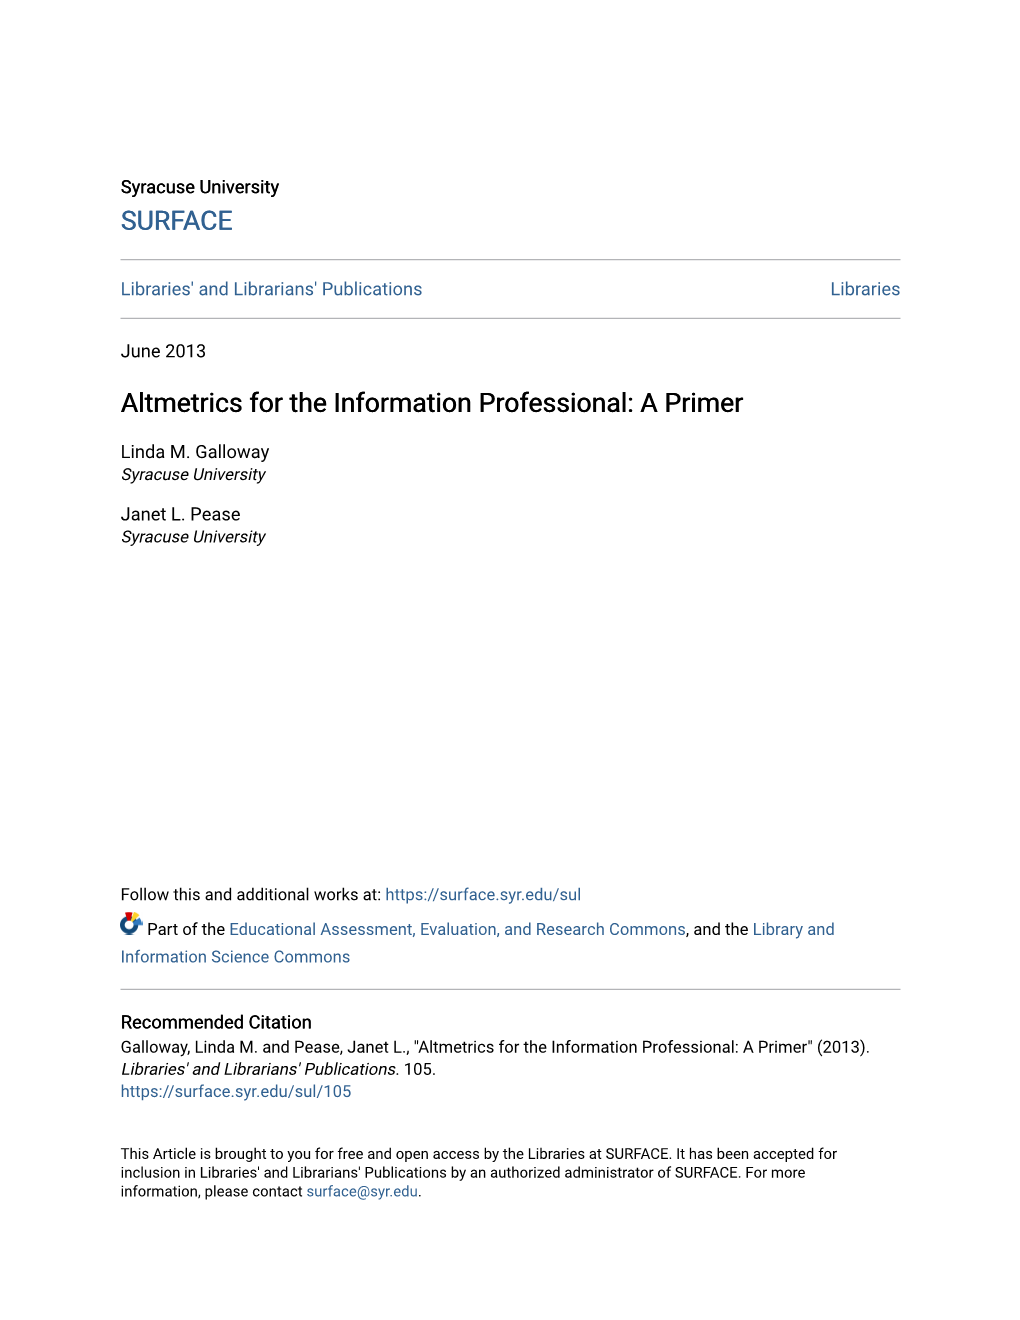 Altmetrics for the Information Professional: a Primer